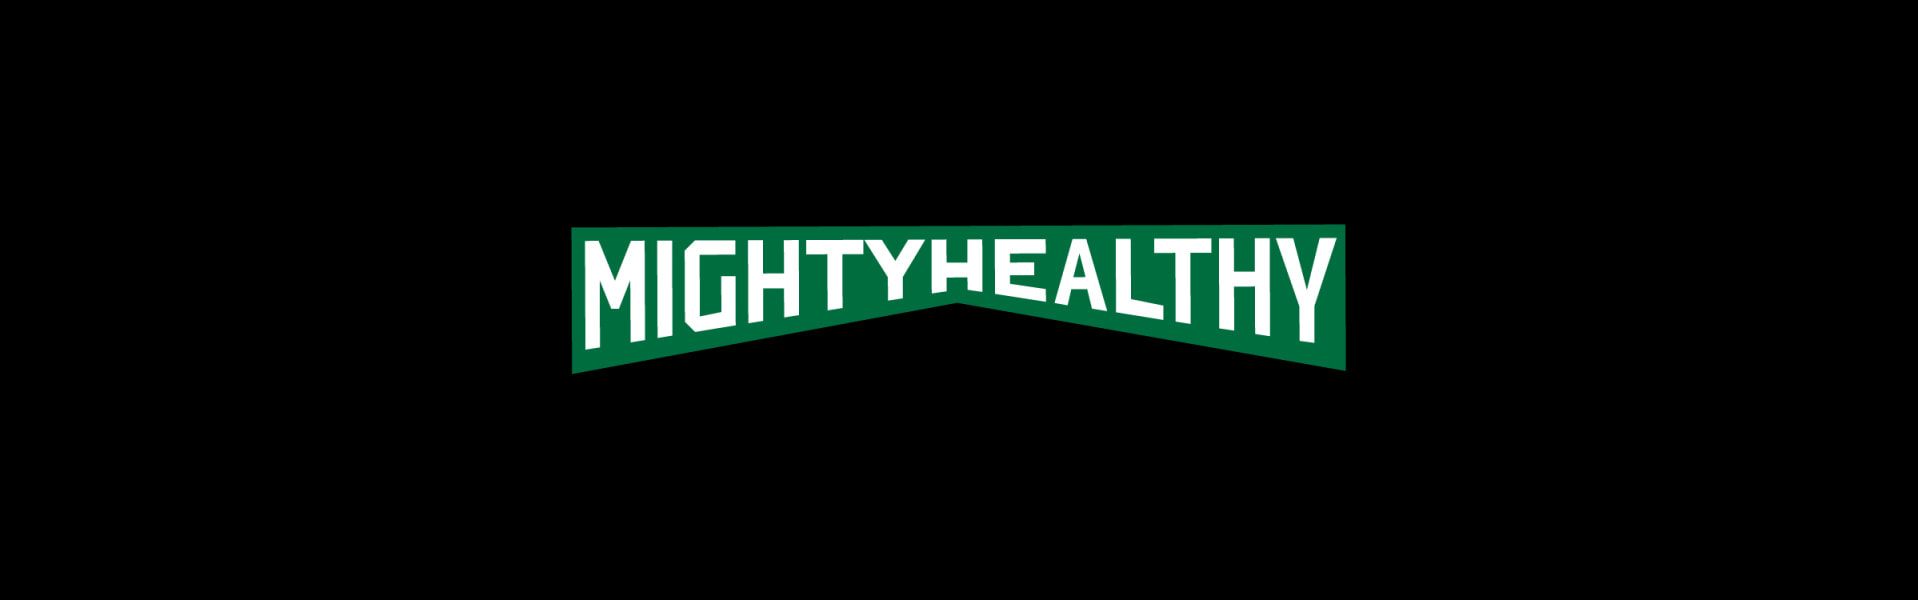 MIGHTY HEALTHYロゴ